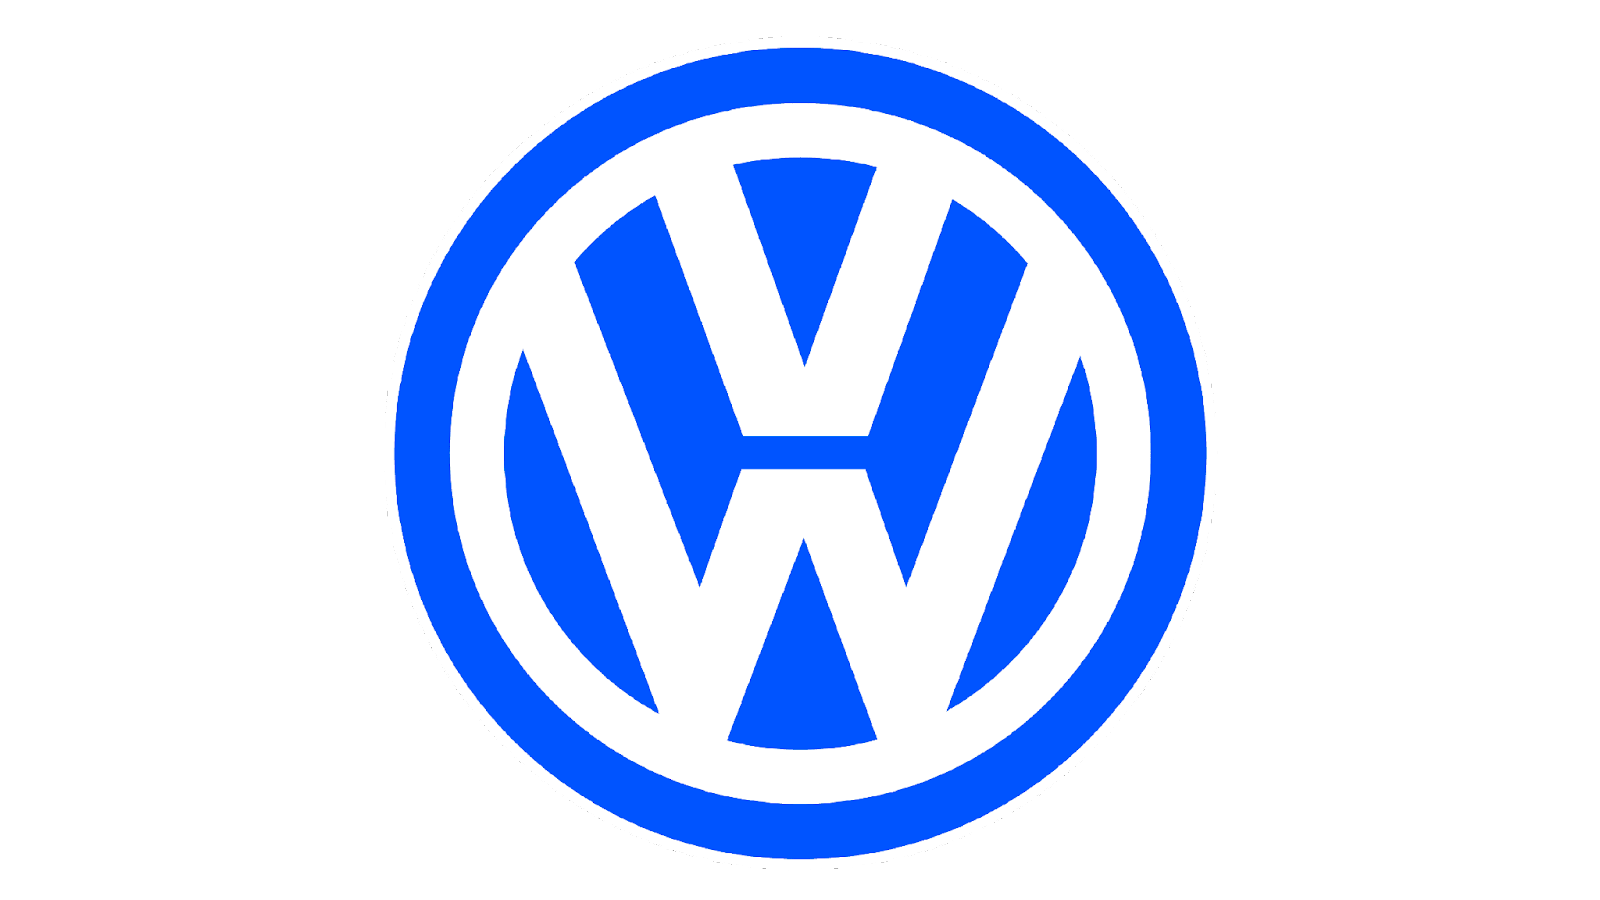 Volkswagen Logo: Meaning, History & More